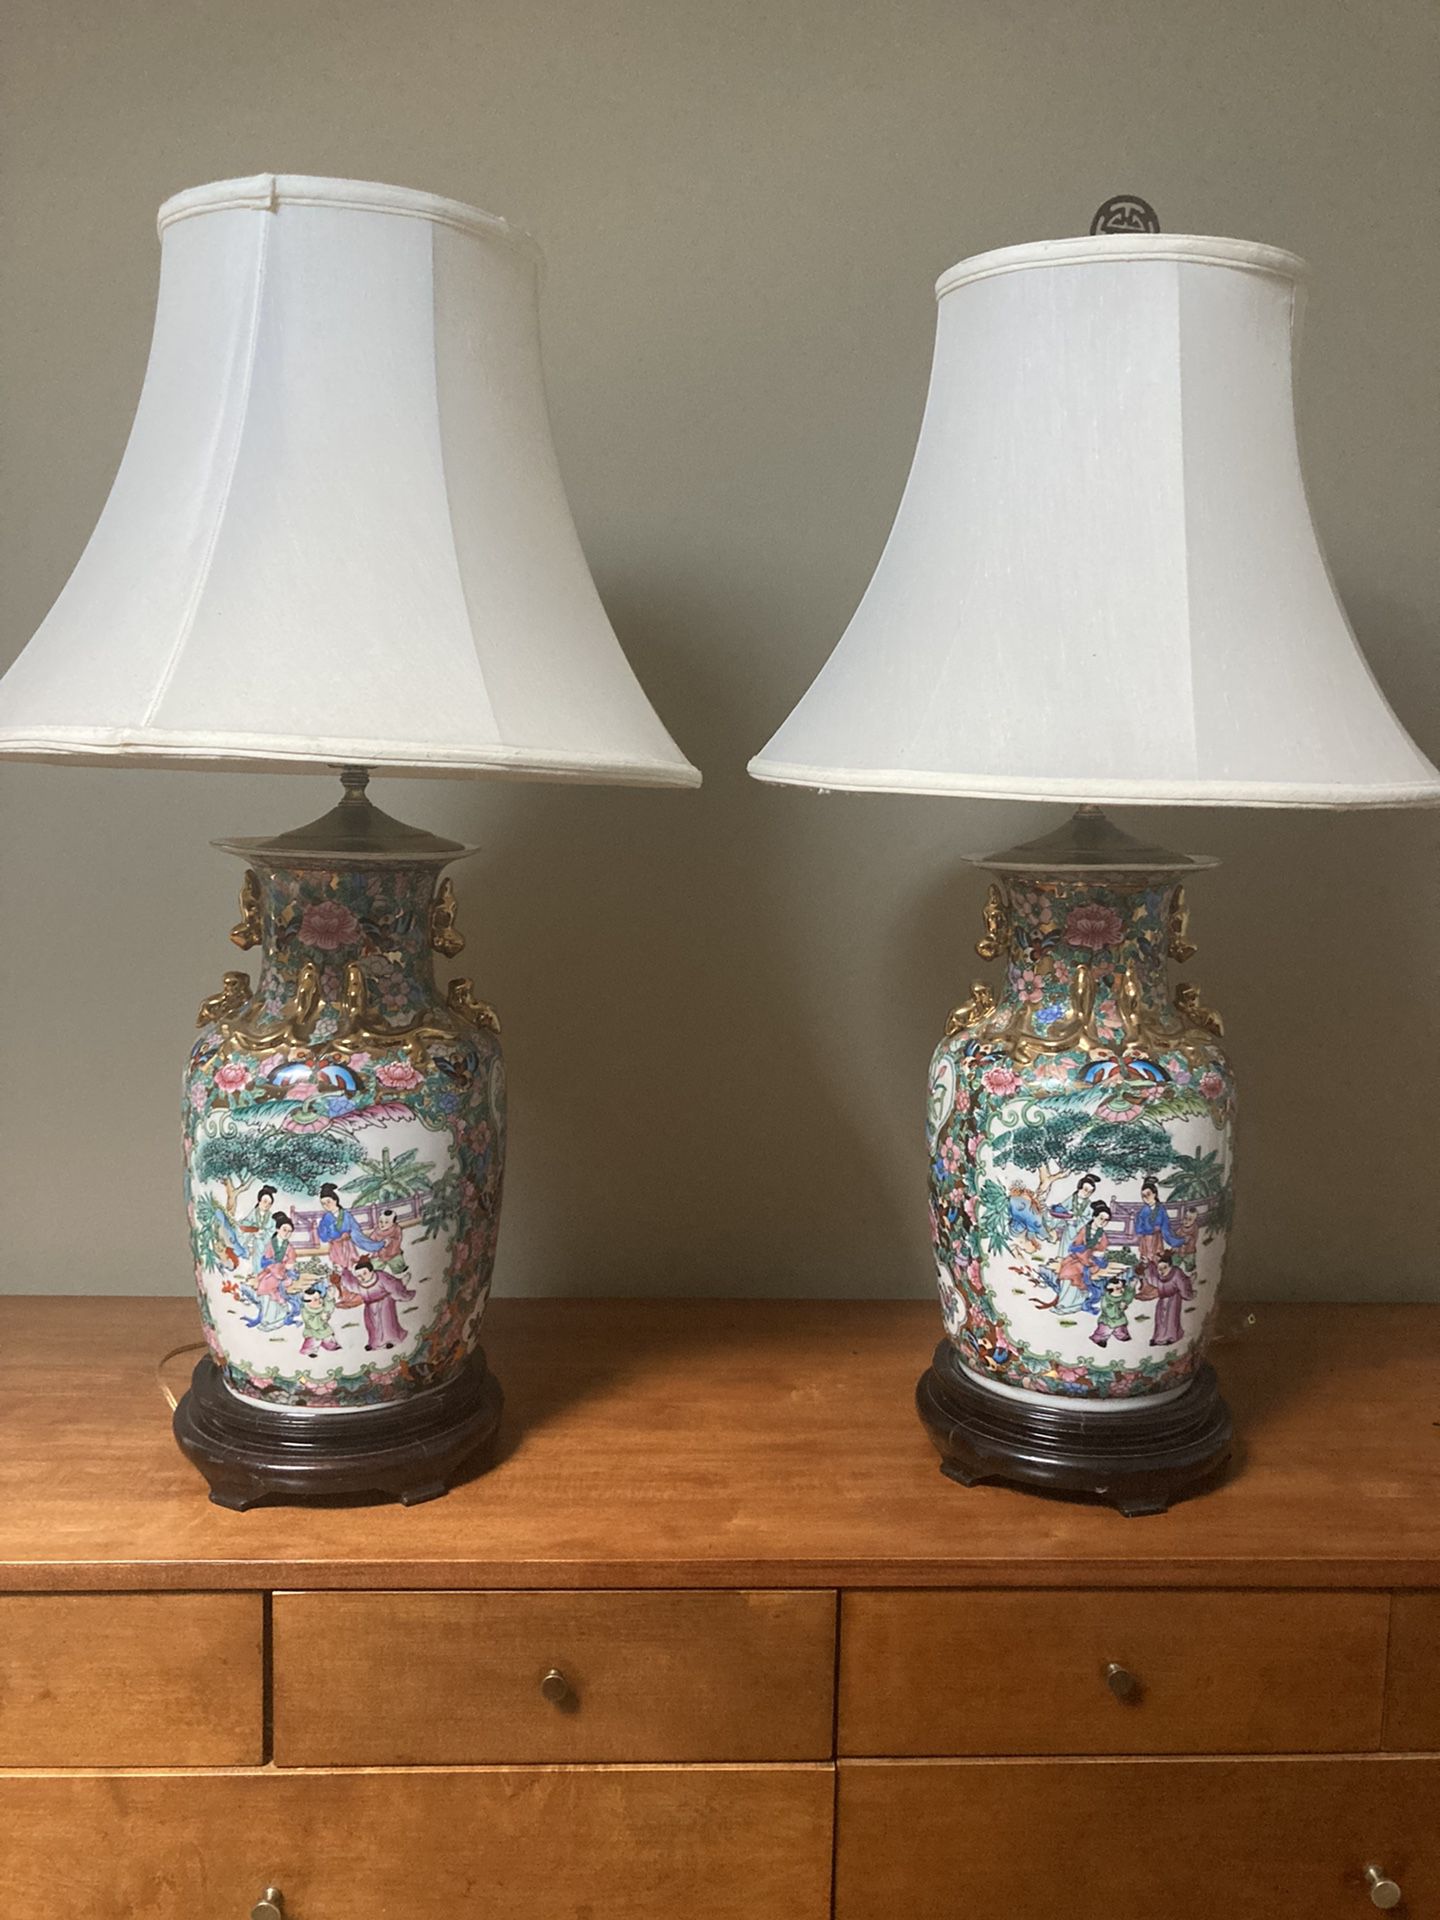 BEAUTIFUL vintage, Chinese porcelain lamps